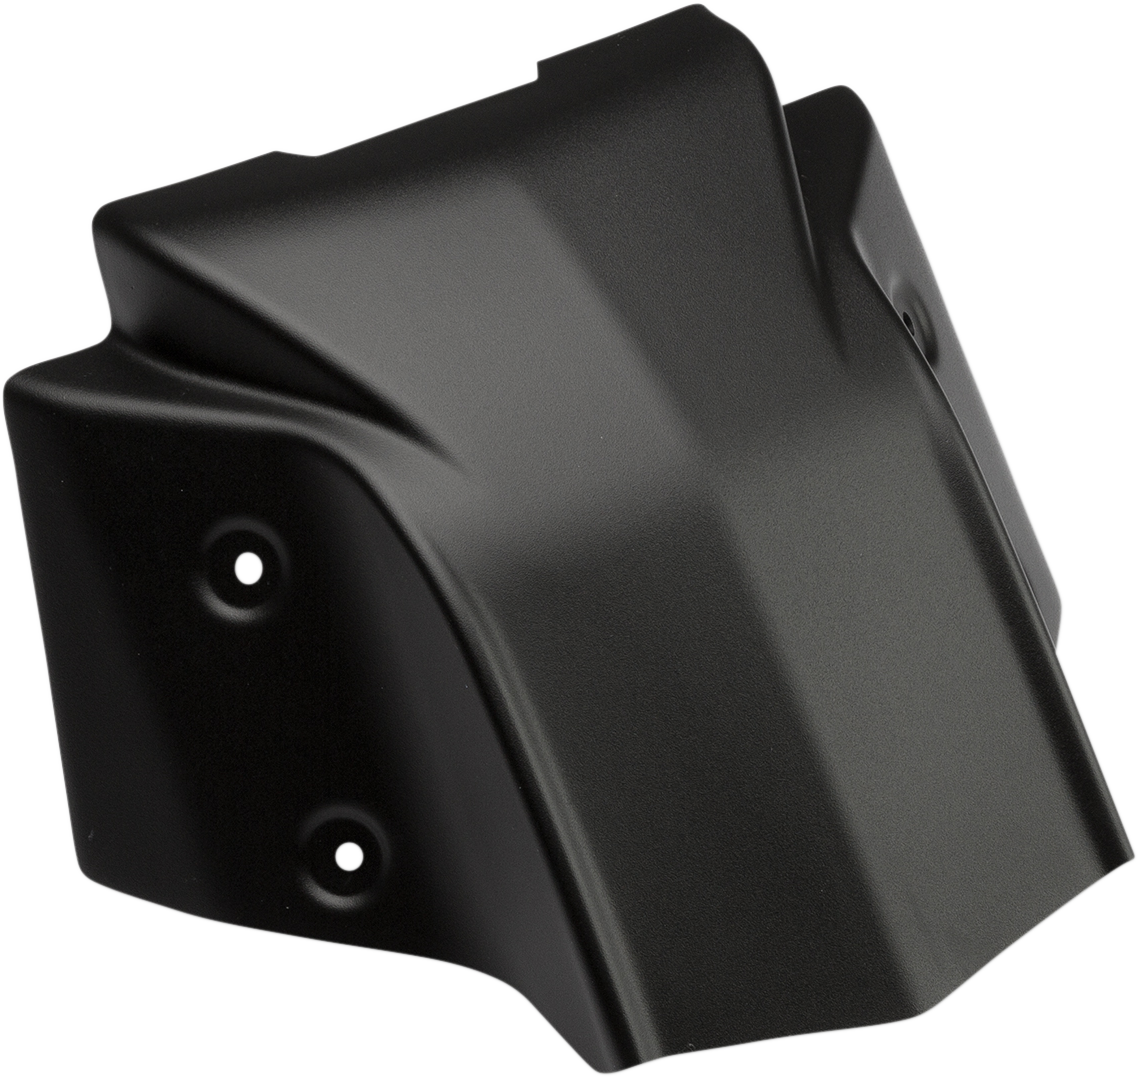 MAIER Intake Cover - Stealth Black 19037-20